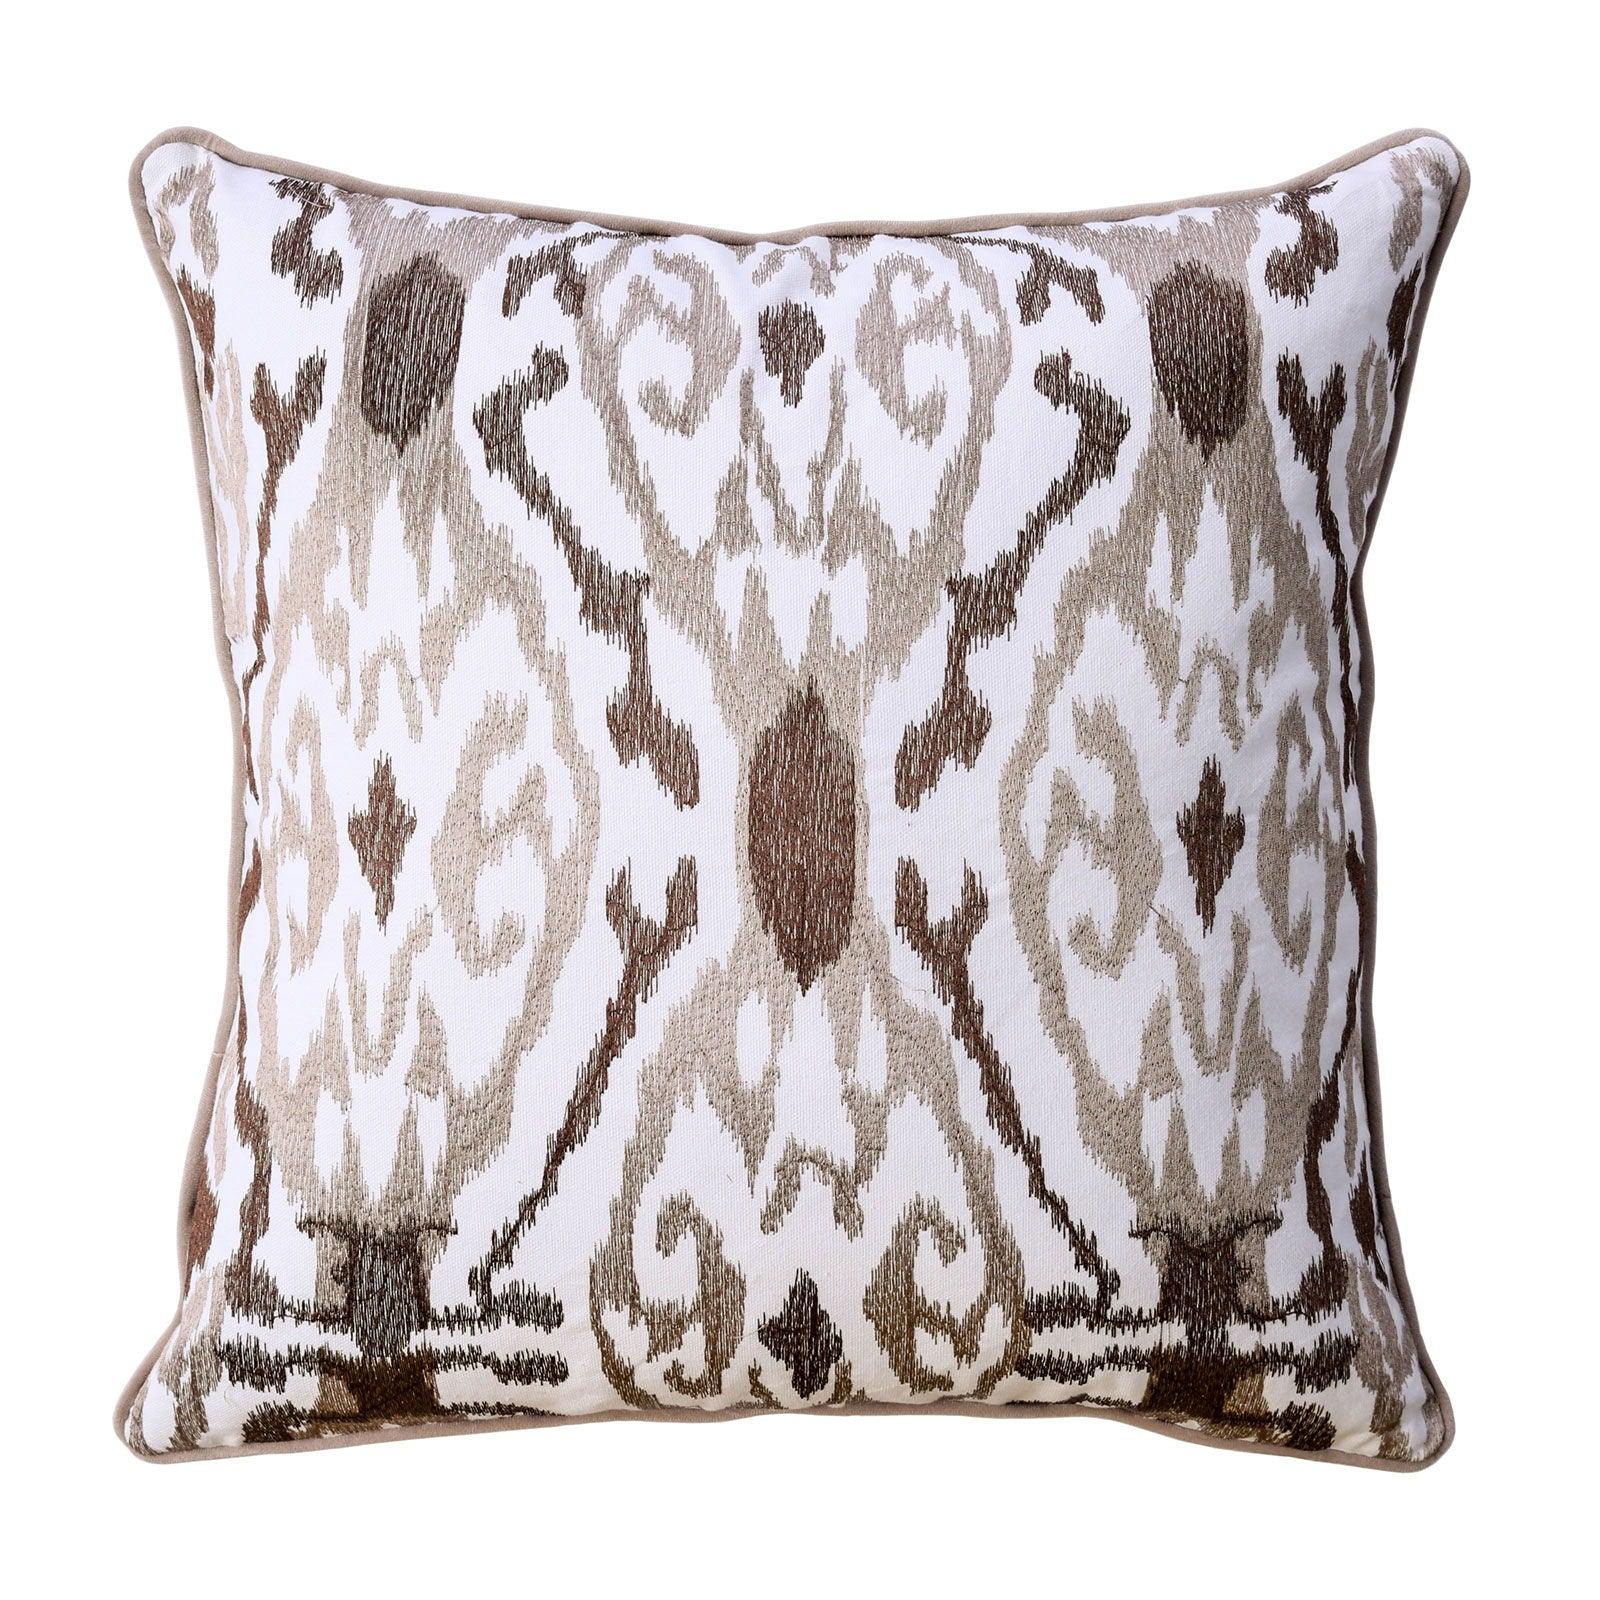 Furniture of America - Lucy - Pillow (Set of 2) - Latte - 5th Avenue Furniture